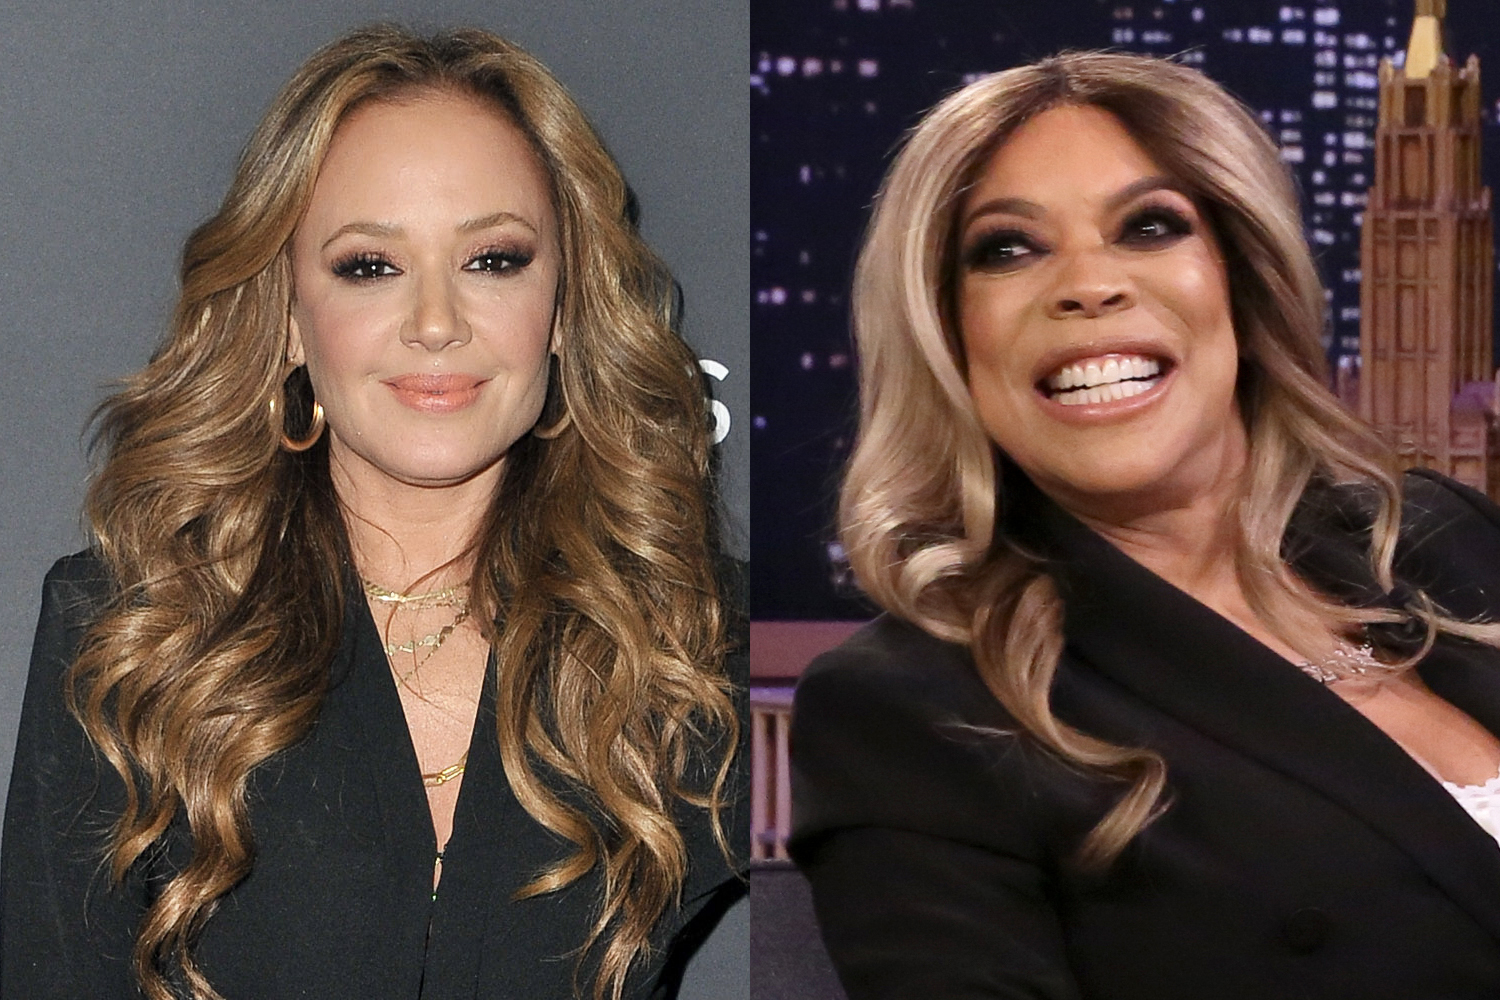 Leah Remini Returns to Guest Host ‘The Wendy Williams Show’ as Star Host Continues ‘Making Progress’ on Health